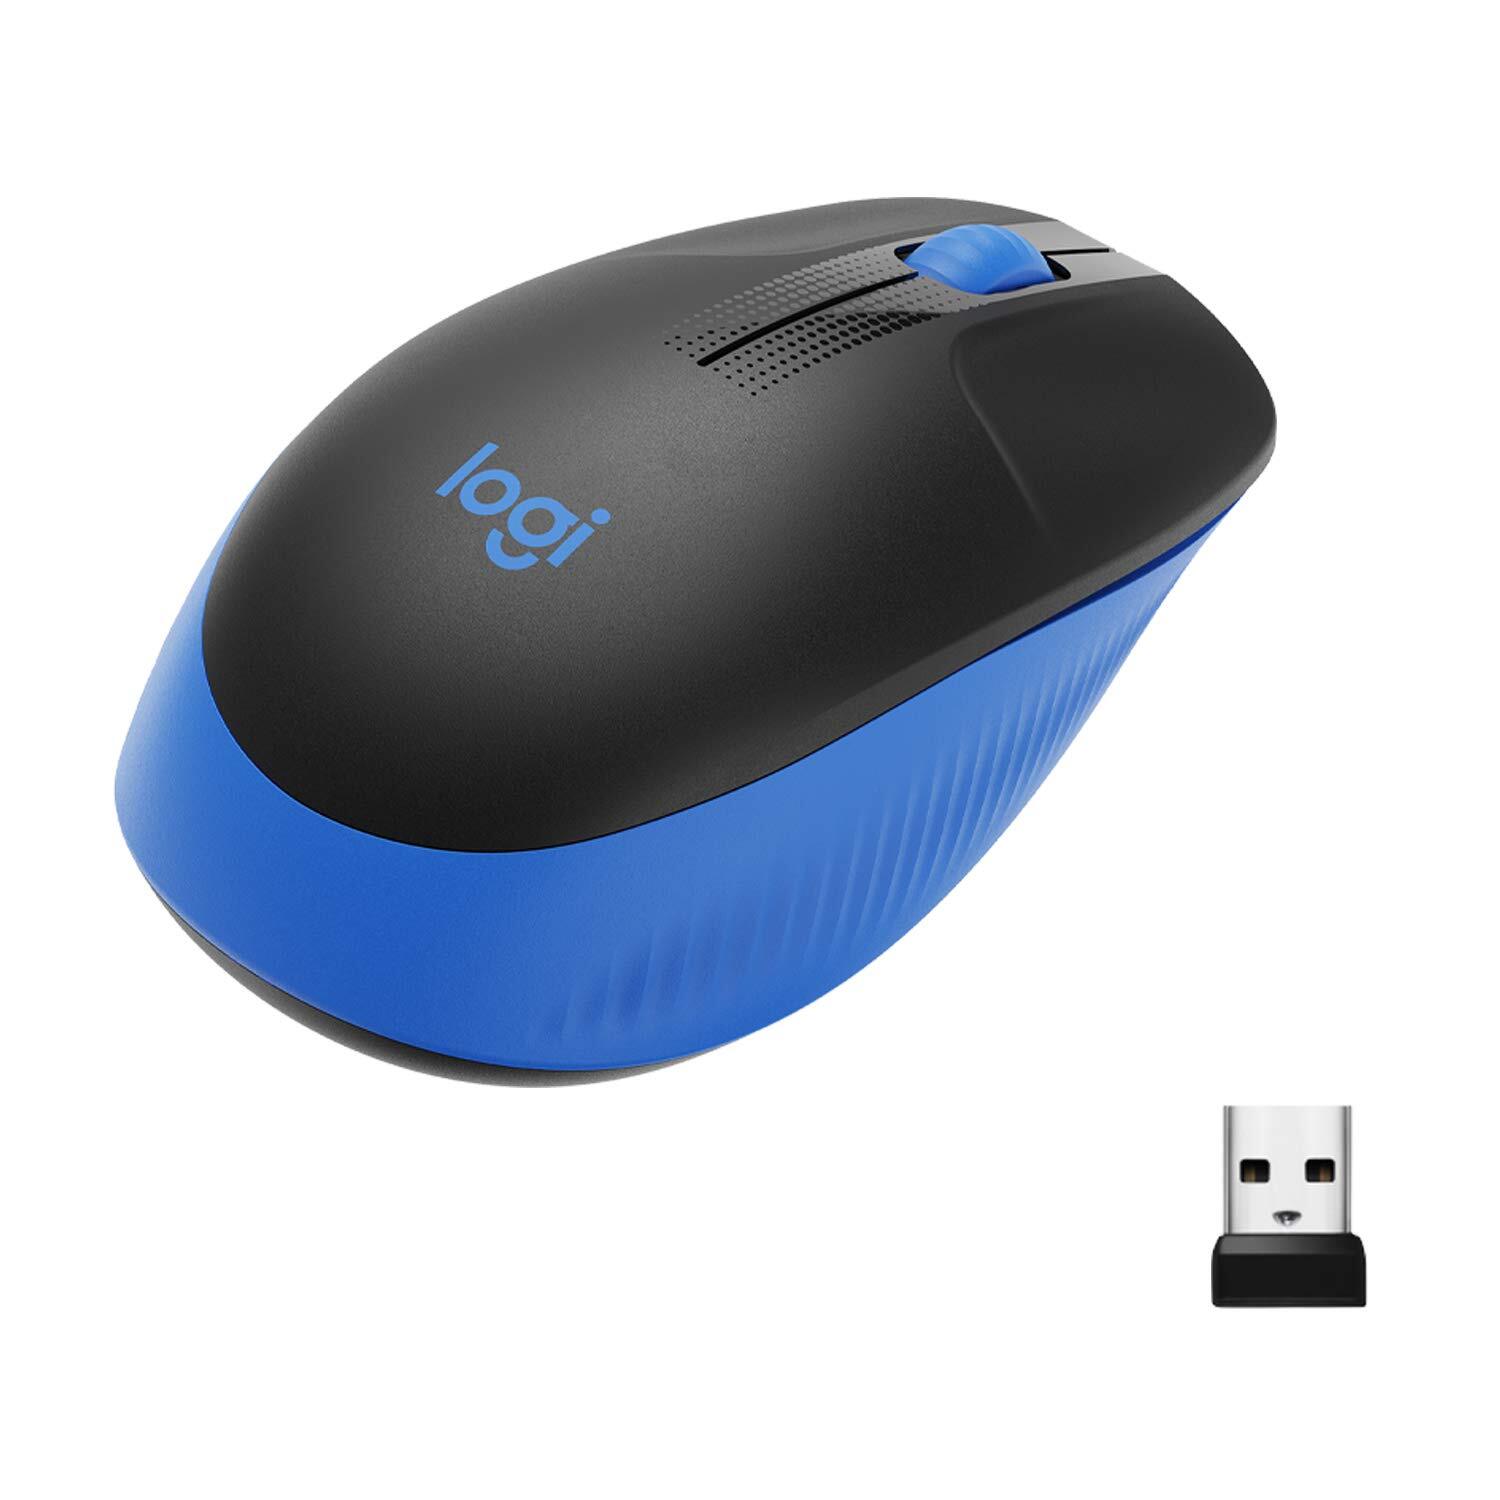 Logitech M190 Wireless Mouse,Full Size Ambidextrous Curve Design, 18-Month Battery with Power Saving Mode, USB Receiver, Precise Cursor Control + Scrolling, Wide Scroll Wheel, Scooped Buttons -Blue